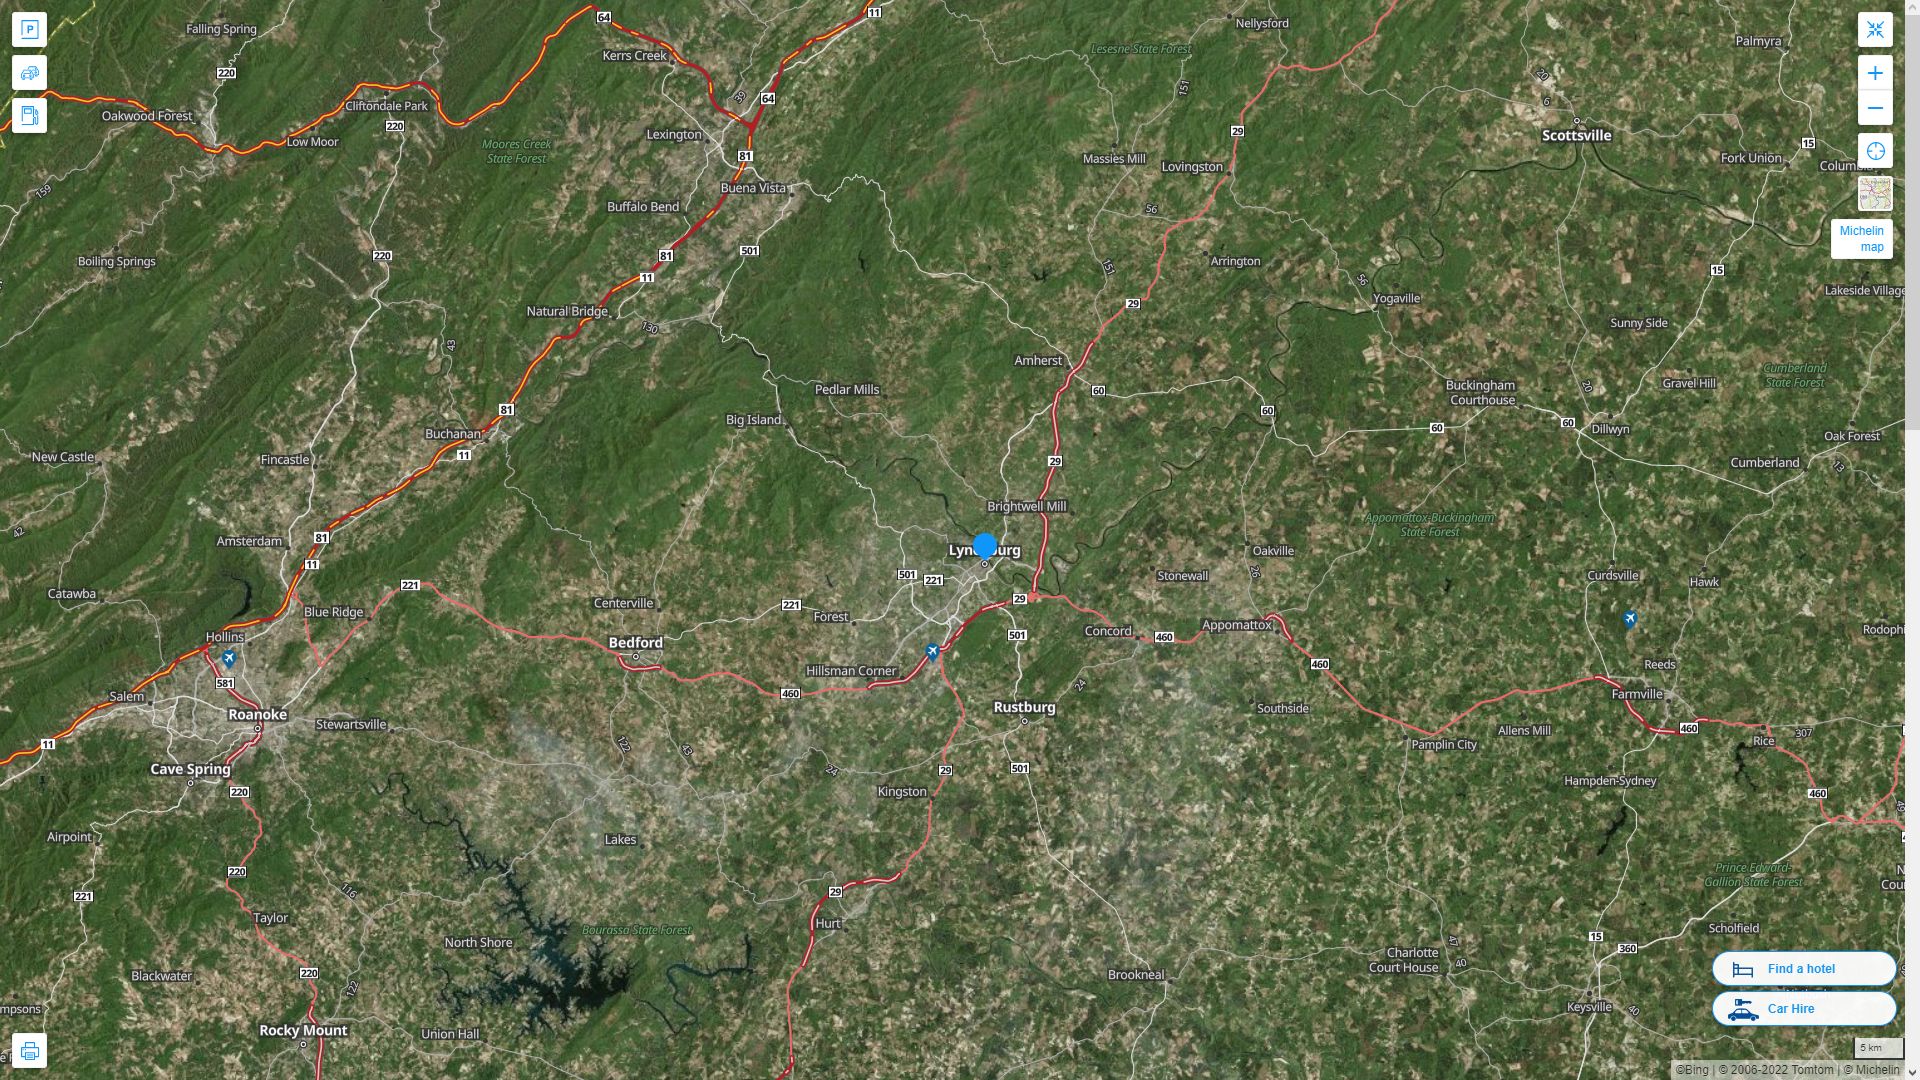 Lynchburg Virginia Highway and Road Map with Satellite View